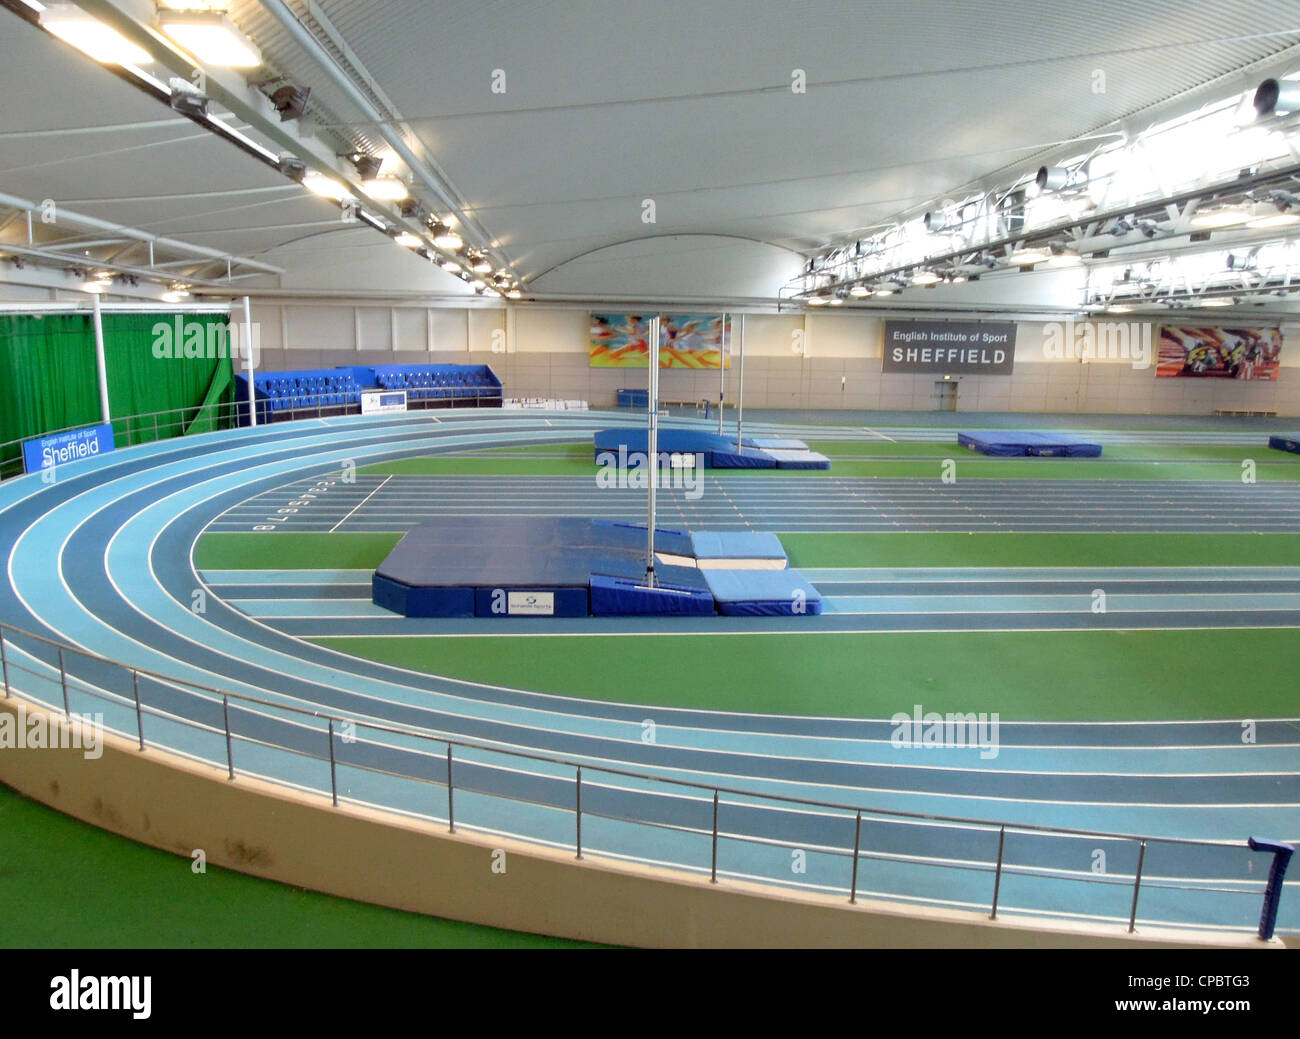 The English Institute of Sport in Sheffield, UK. A national centre for sports training, medicine and science. Stock Photo